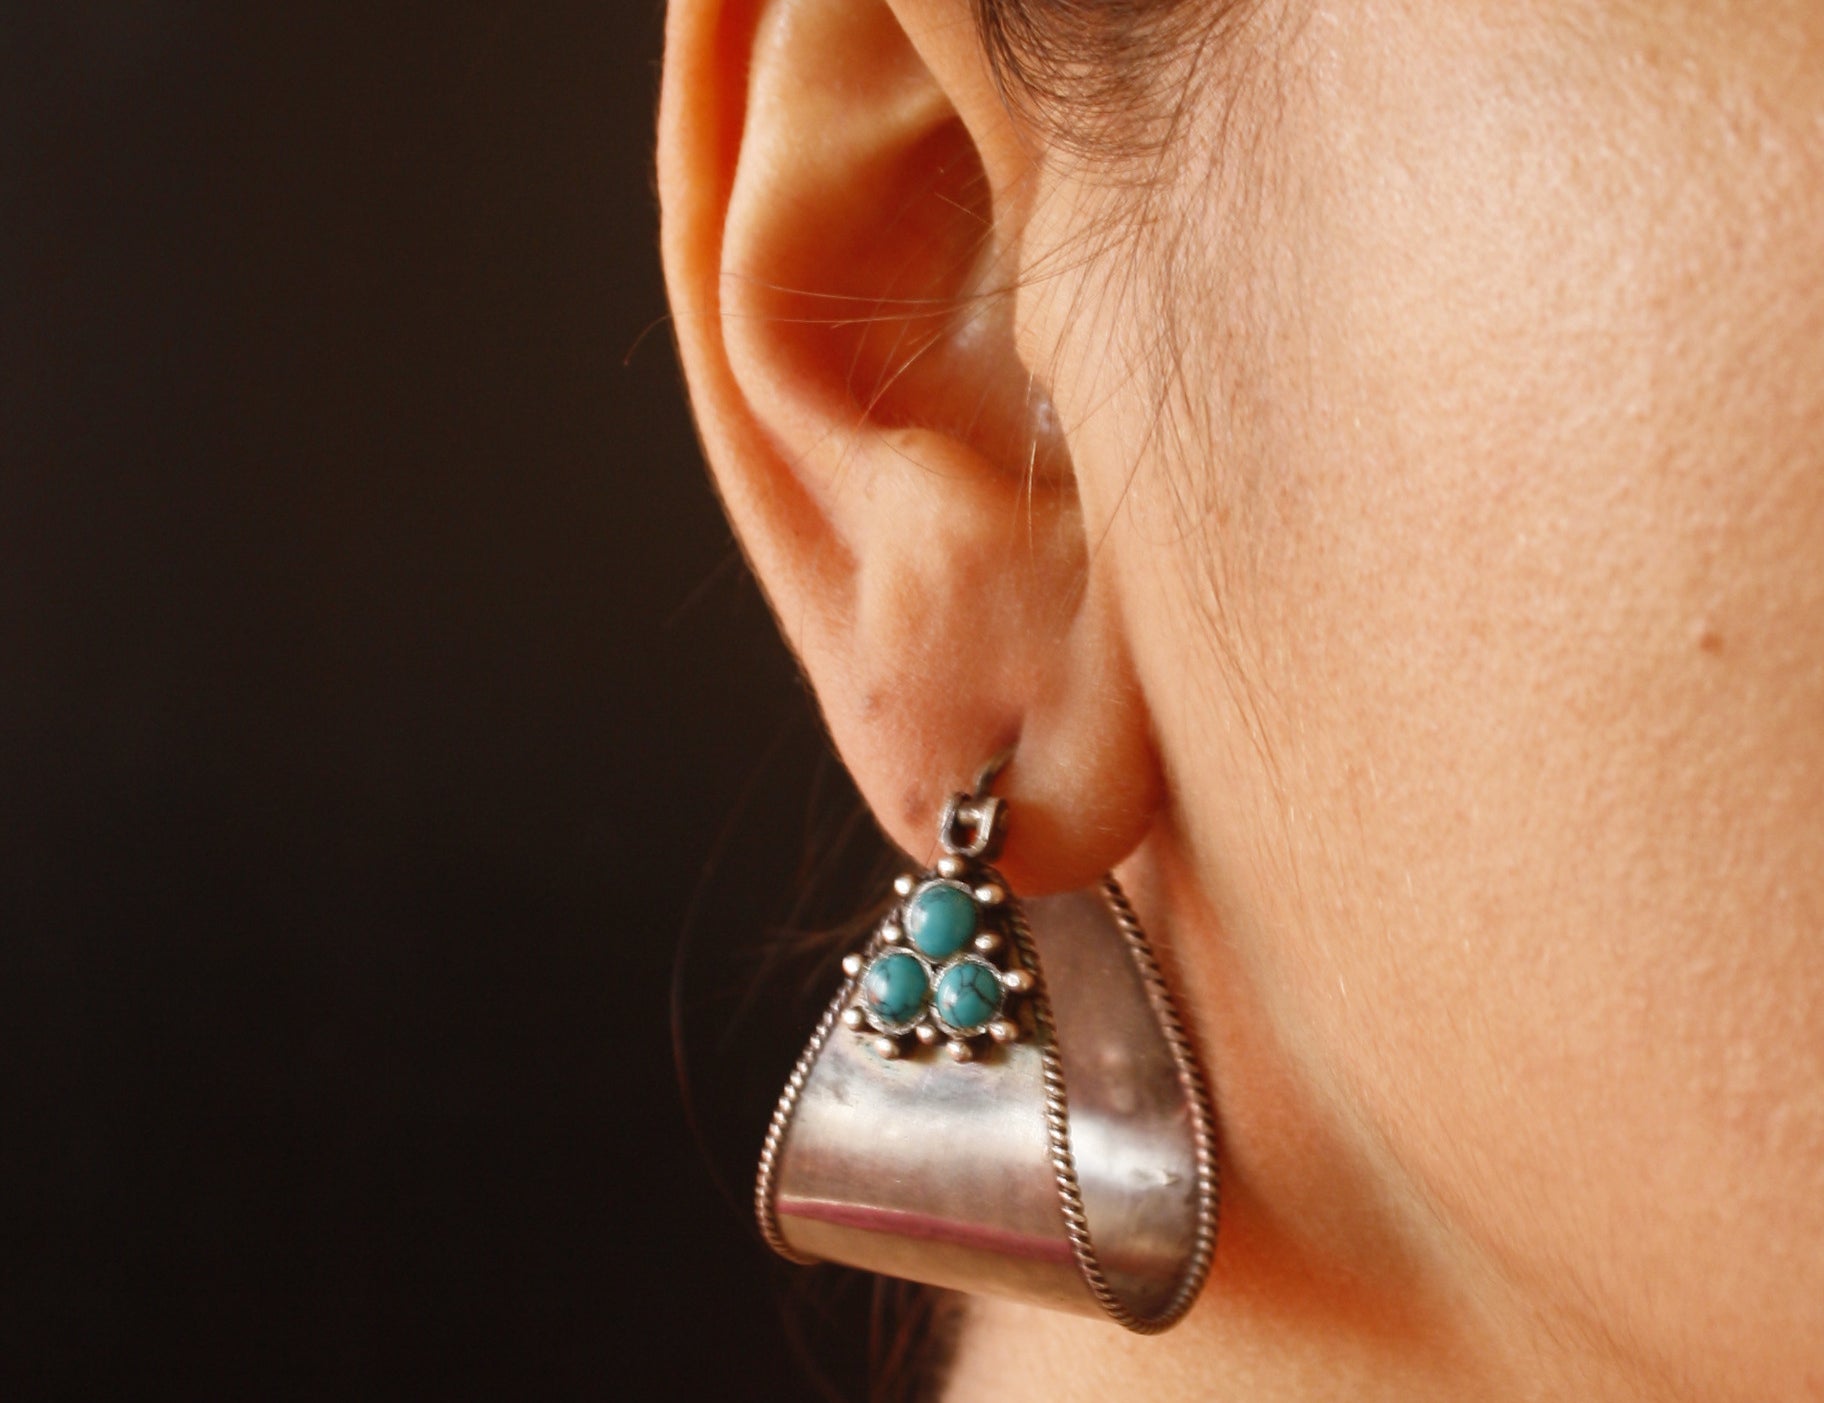 Buy online Silver earrings - Turquoise Wraps by Quirksmith